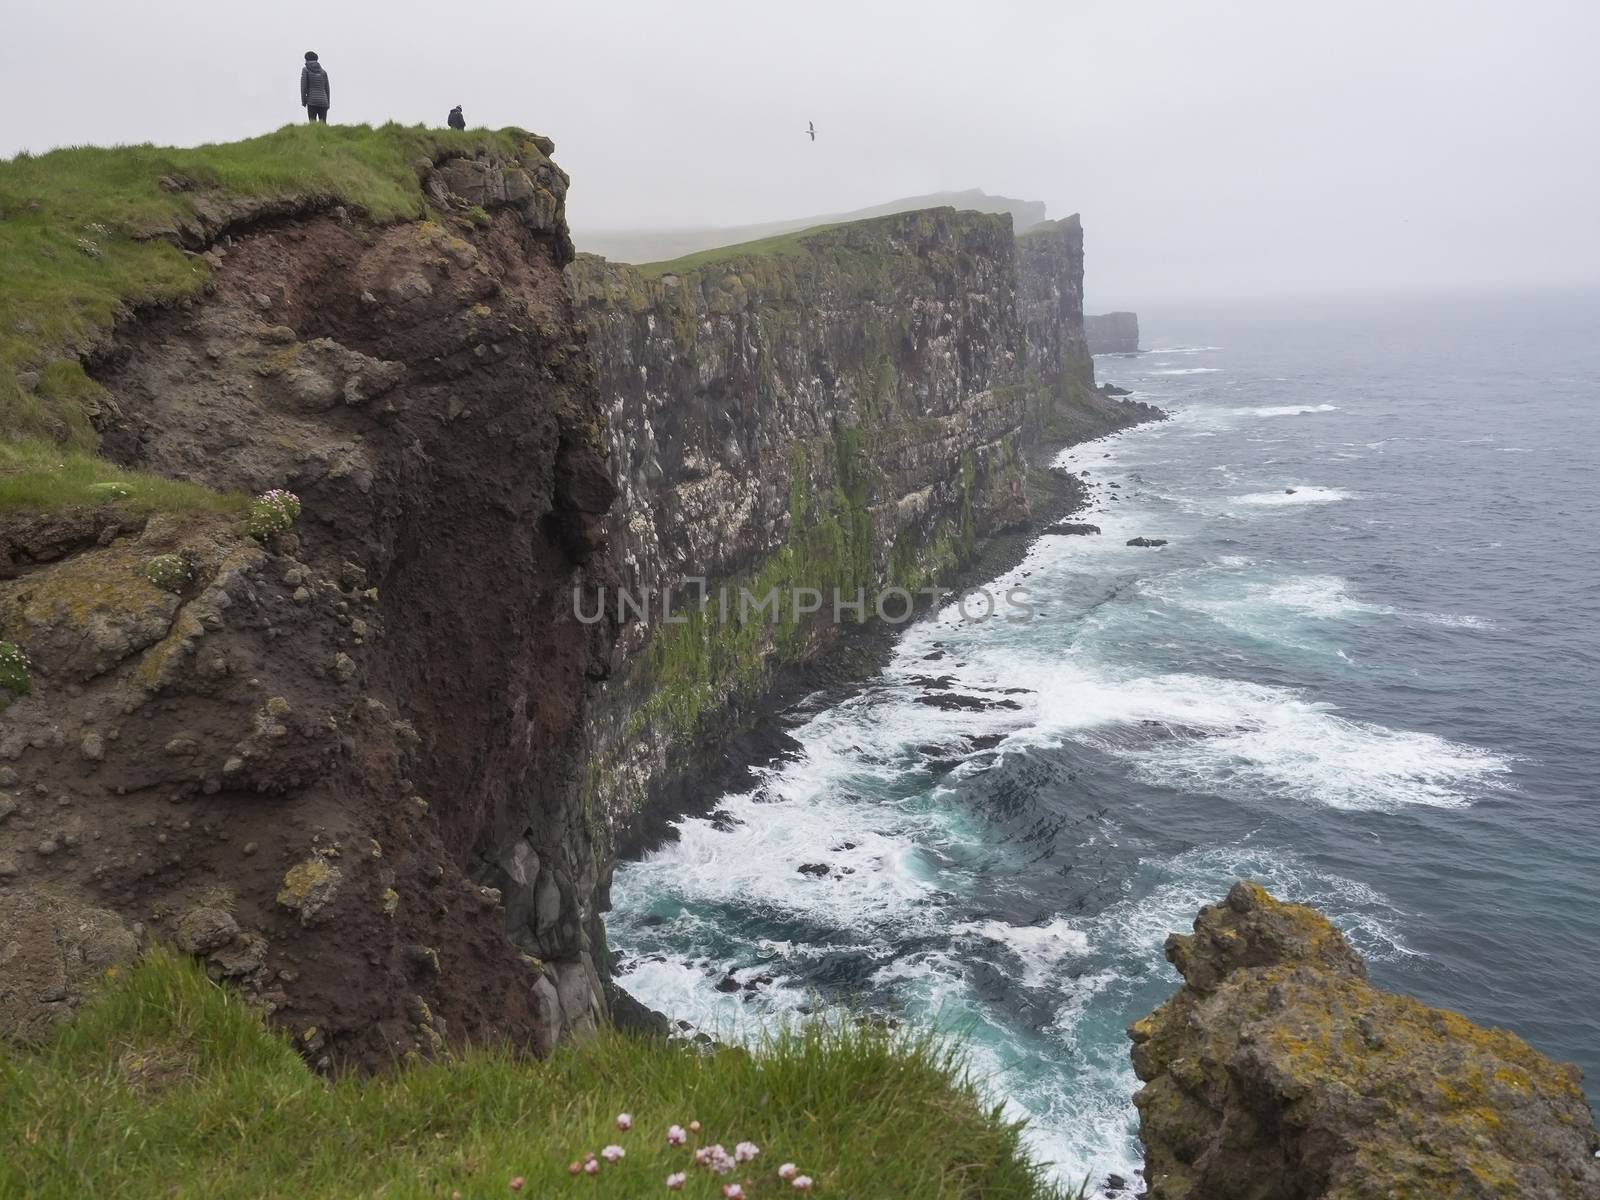 Beautiful Latrabjarg cliffs, Europe's largest bird cliff and home to millions of birds with two people standing on the cliff, ocean waves and pink flowers, Western Fjords of Iceland, selective focus